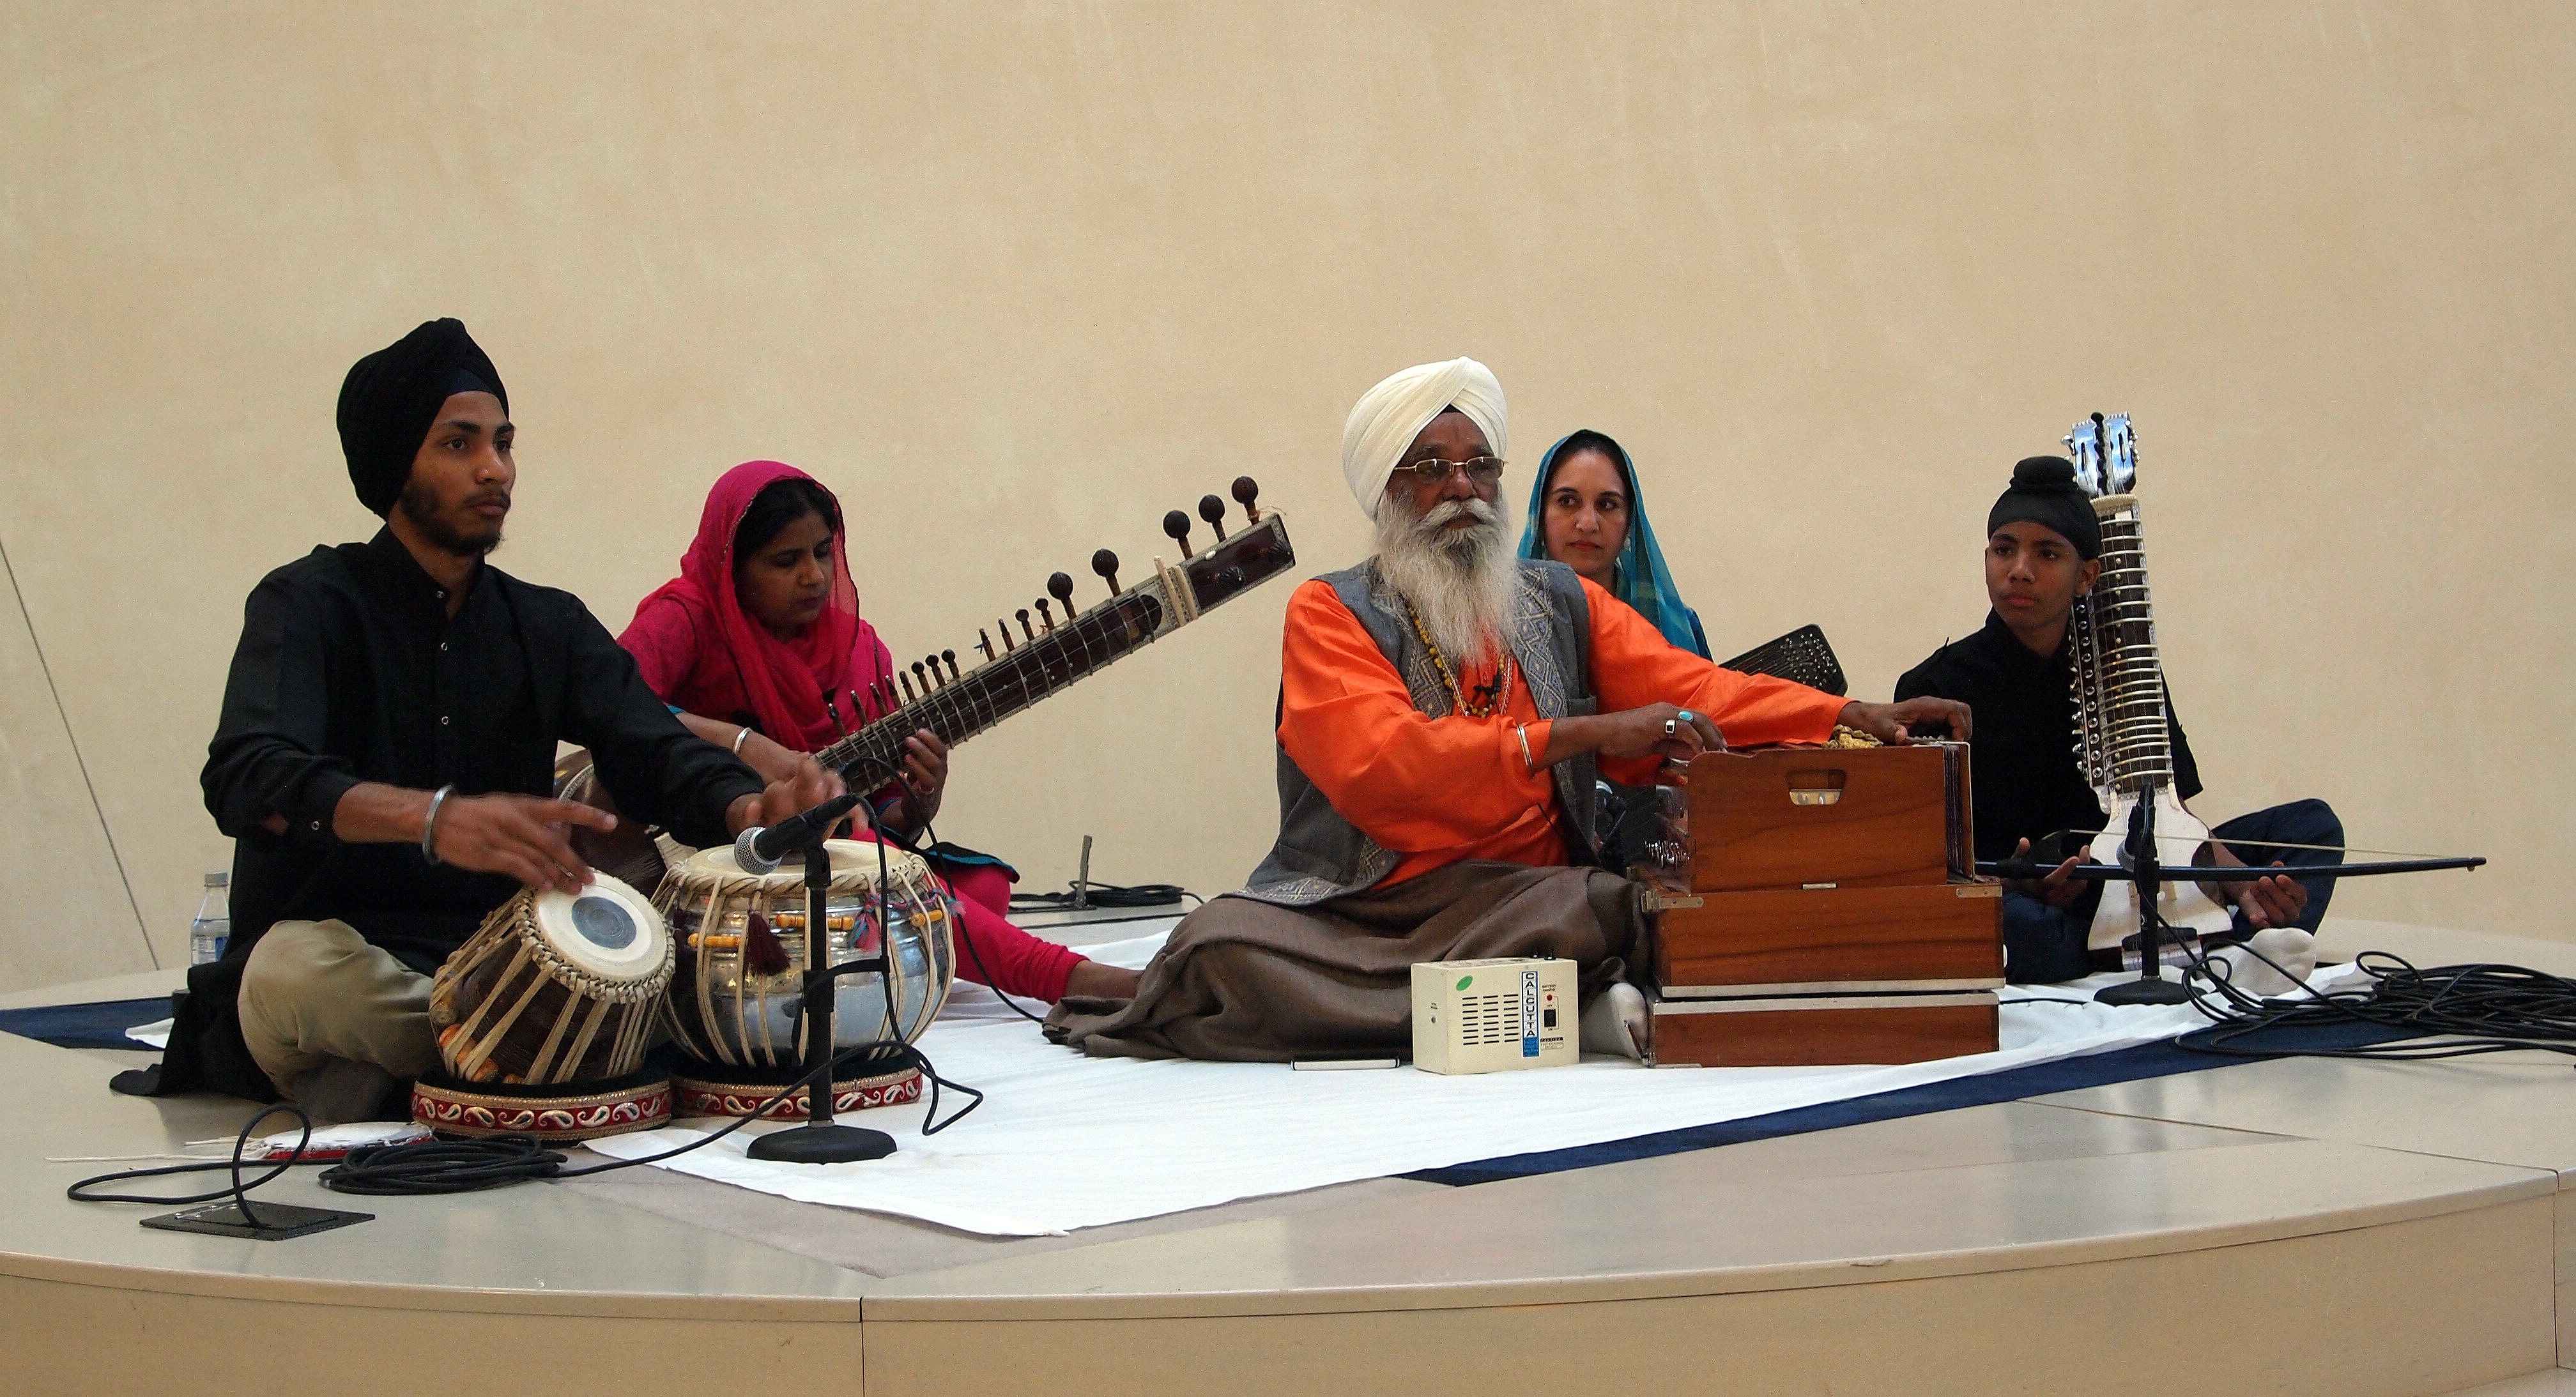 group playing music